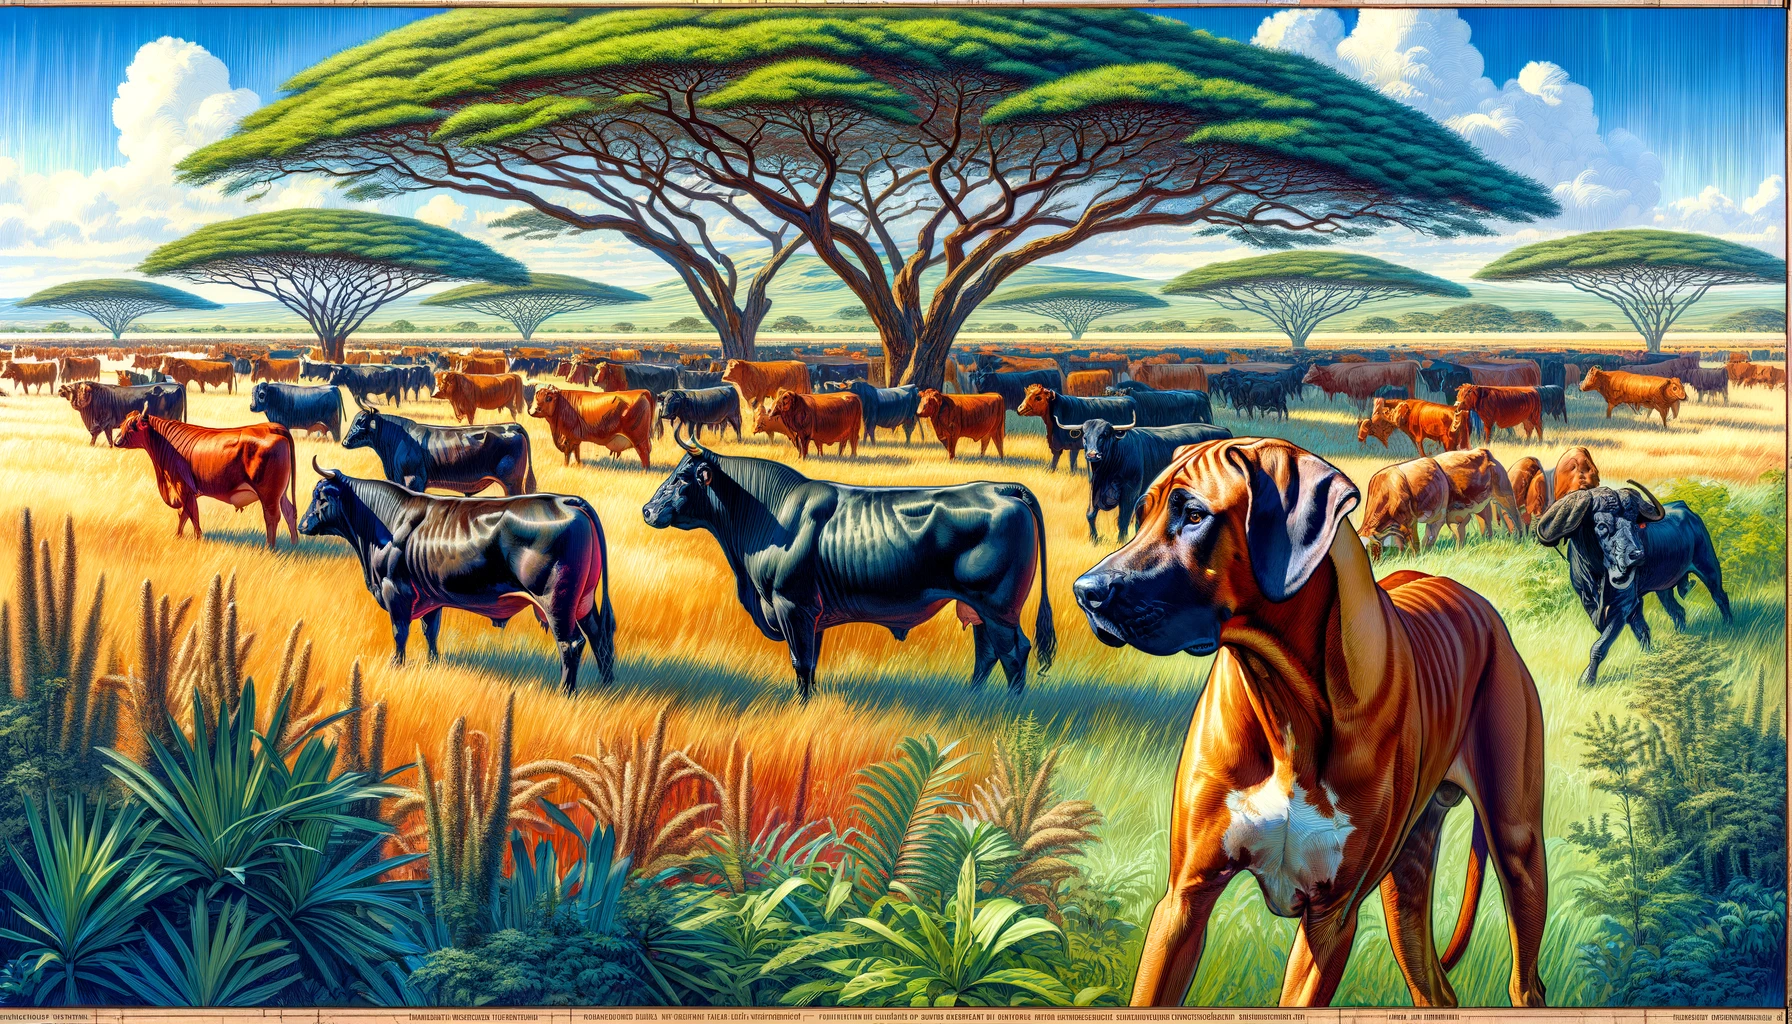 African Black Angus, Hereford, and Simmental Breeder Association - A vivid and detailed wide aspect illustration showing the African Black Angus, Hereford, and Simmental Breeder Association farm (2)